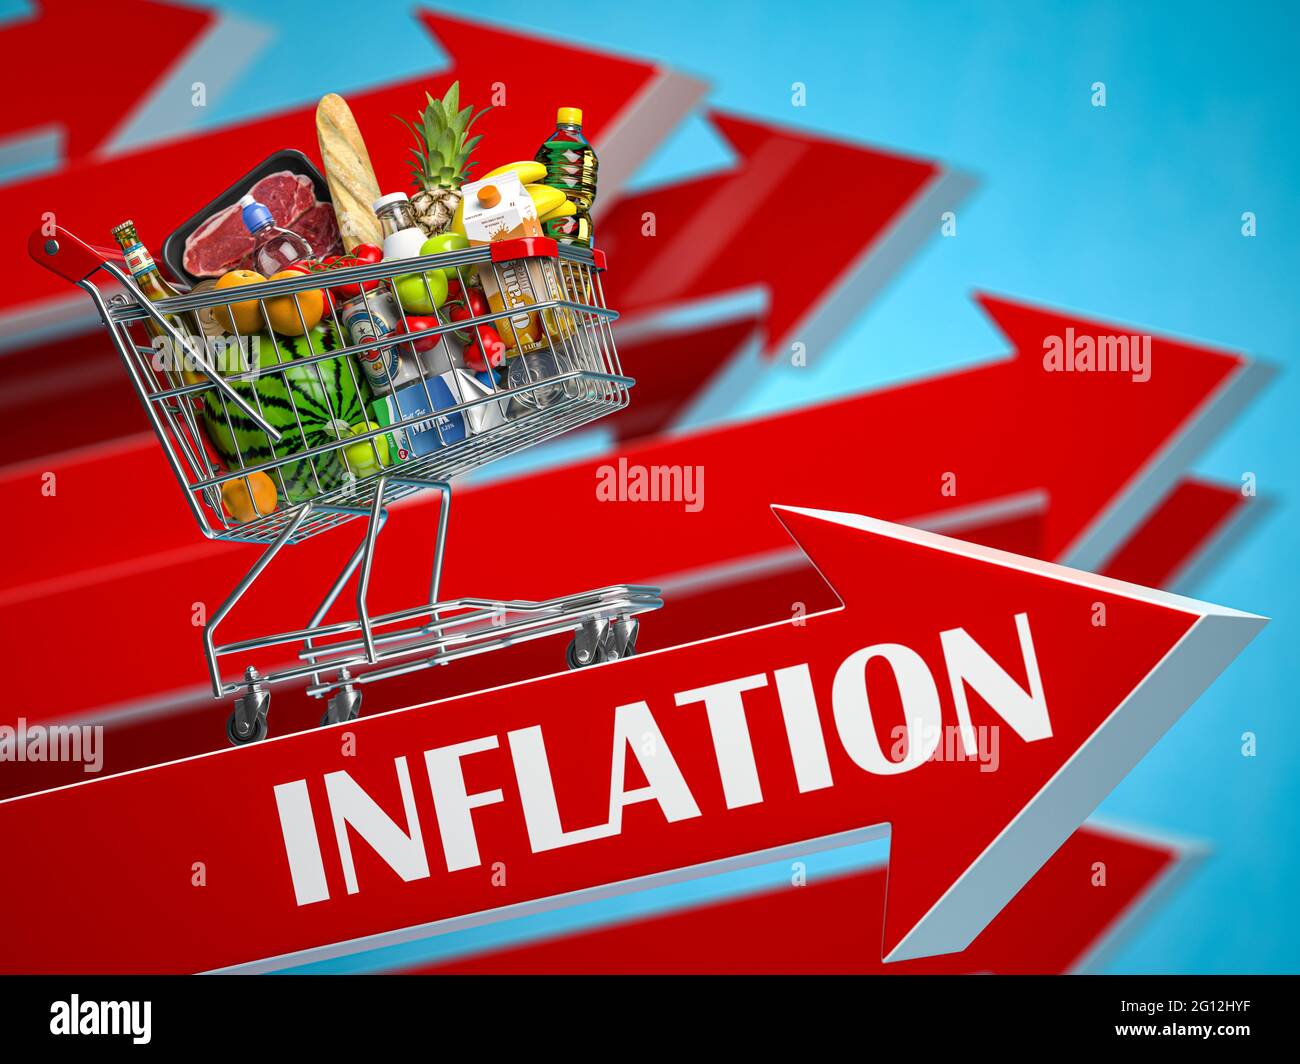 Inflation, growth of market basket or consumer price index concept. Shopping basket with foods on arrow. 3d illustration. Stock Photo